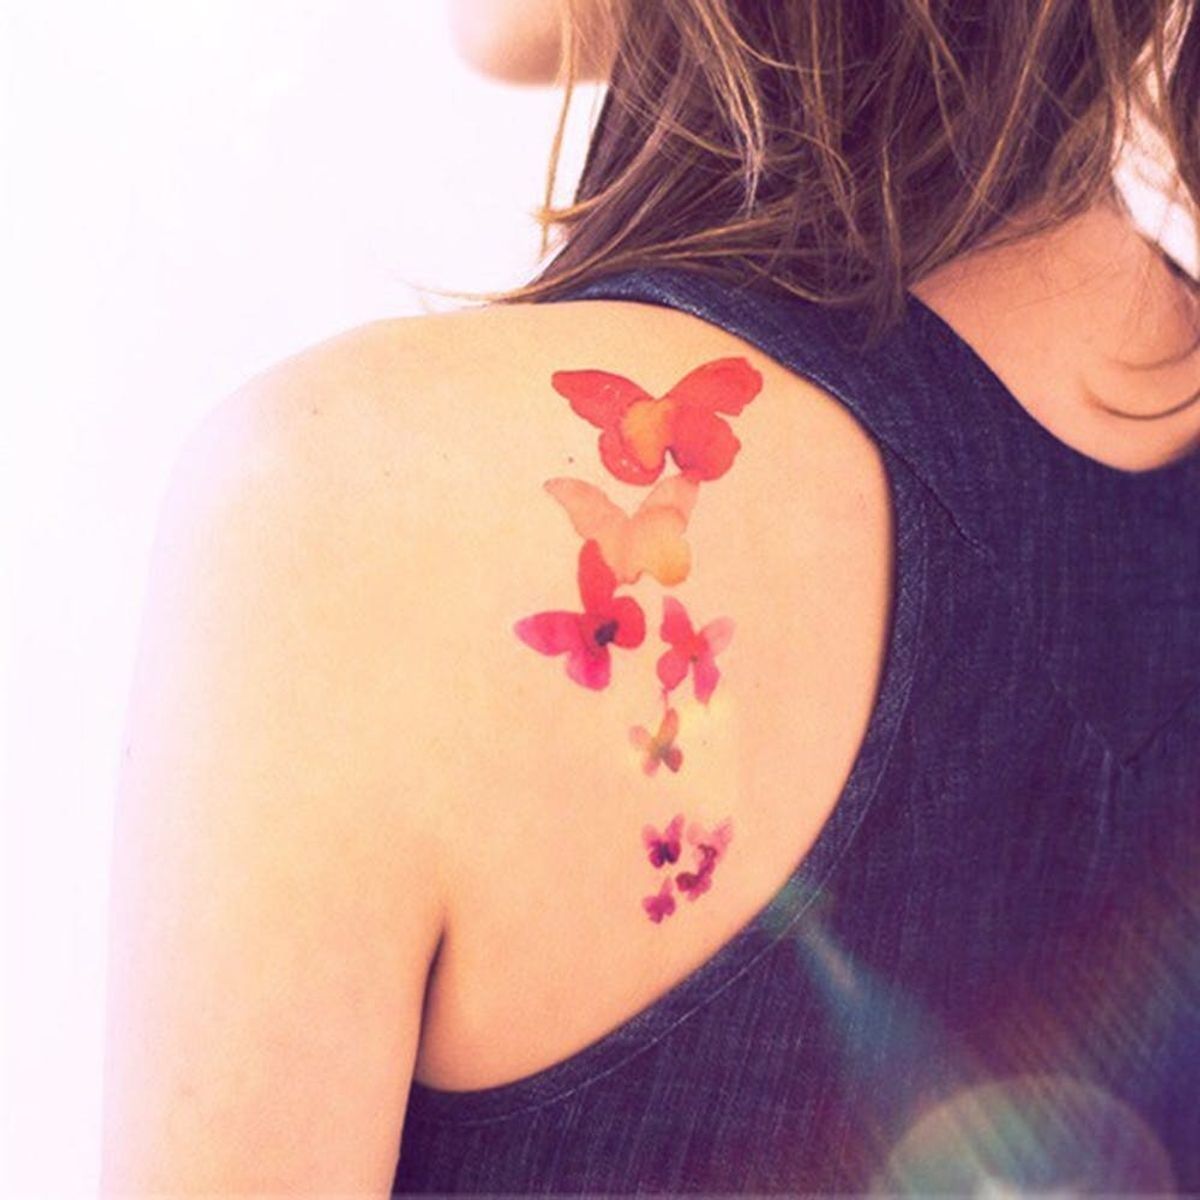 13 Temporary Tattoos You’ll Want to Try This Spring